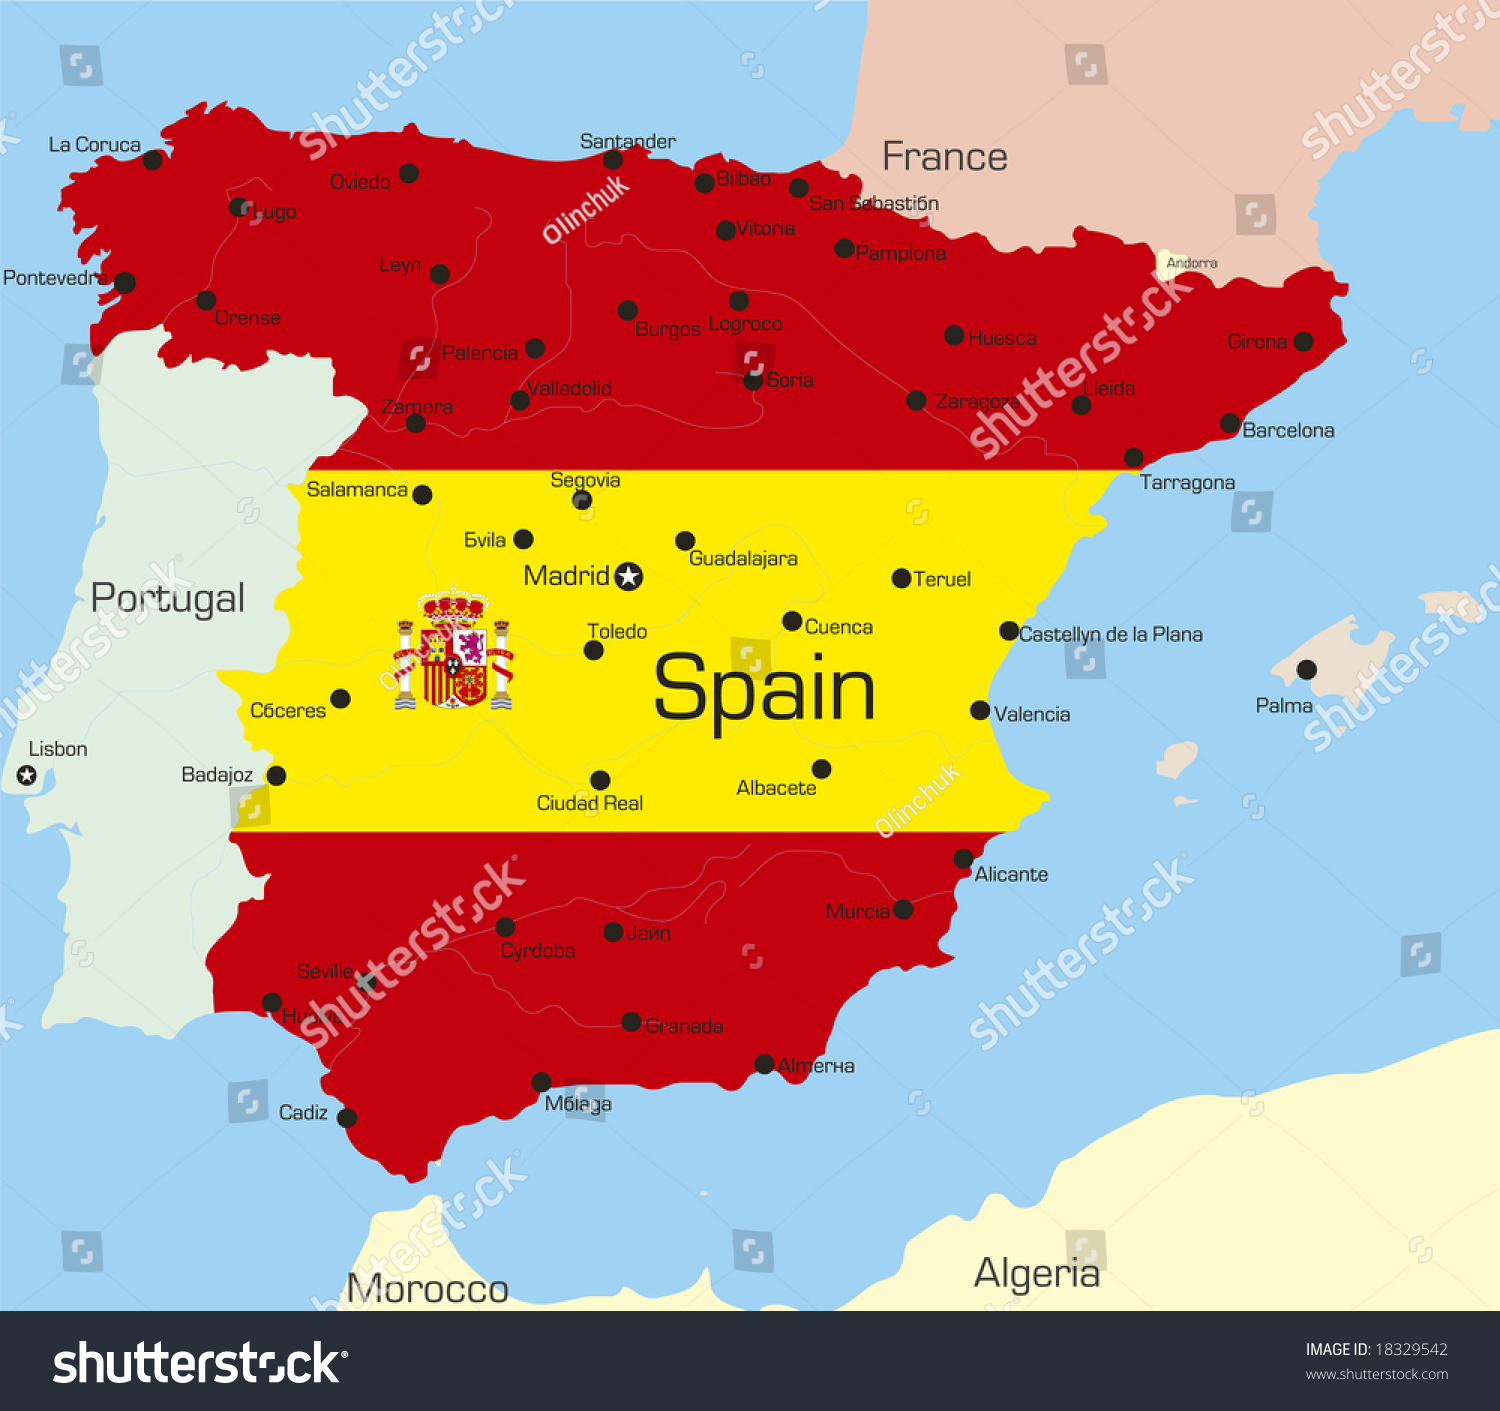 Tourism in Spain